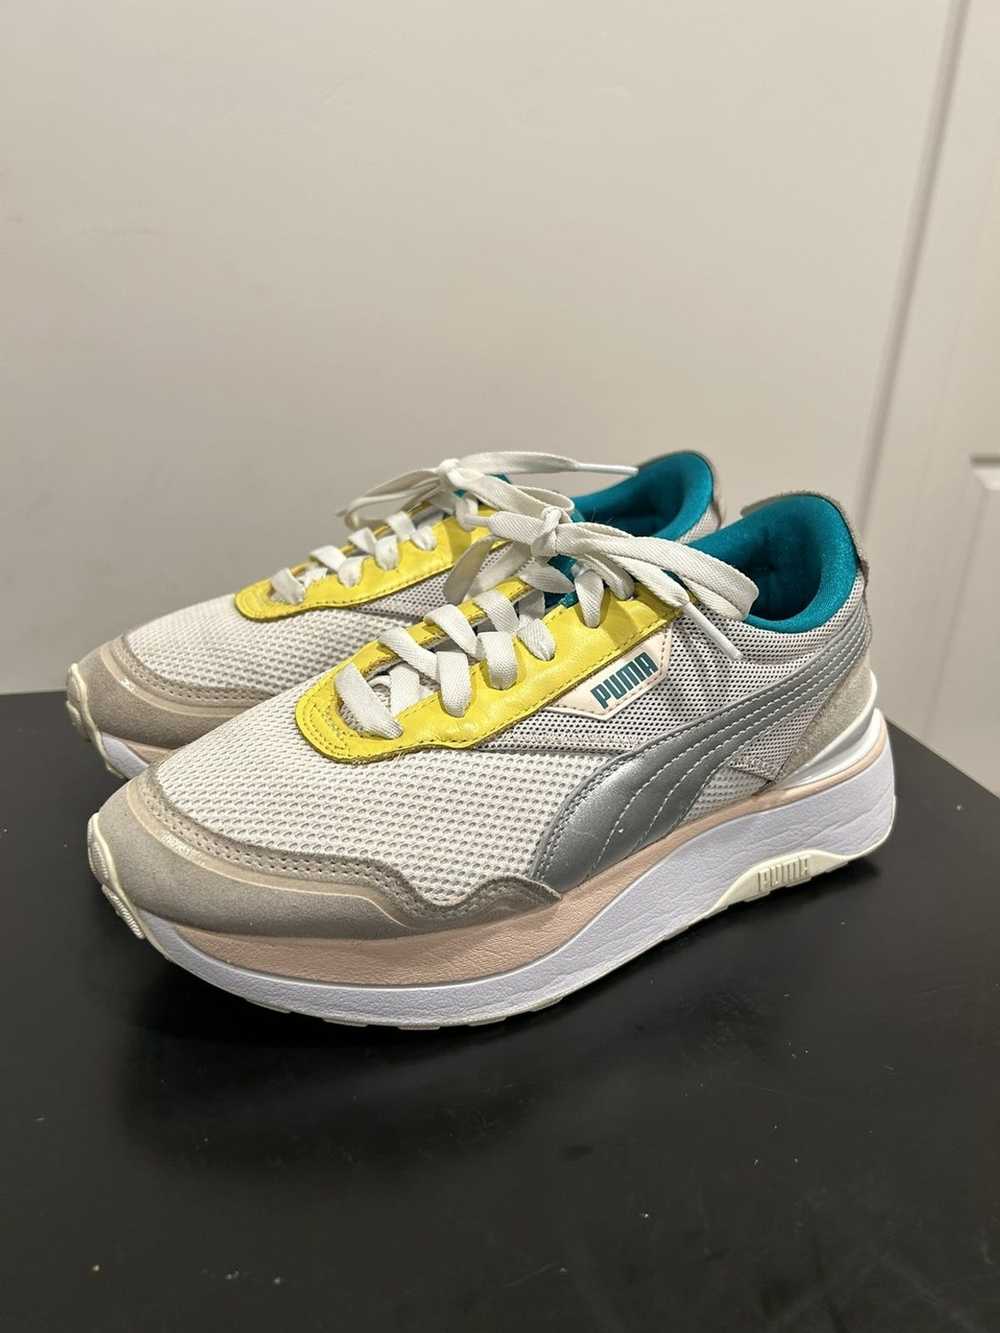 Cruise Rider Roar White Mineral Yellow Sneakers